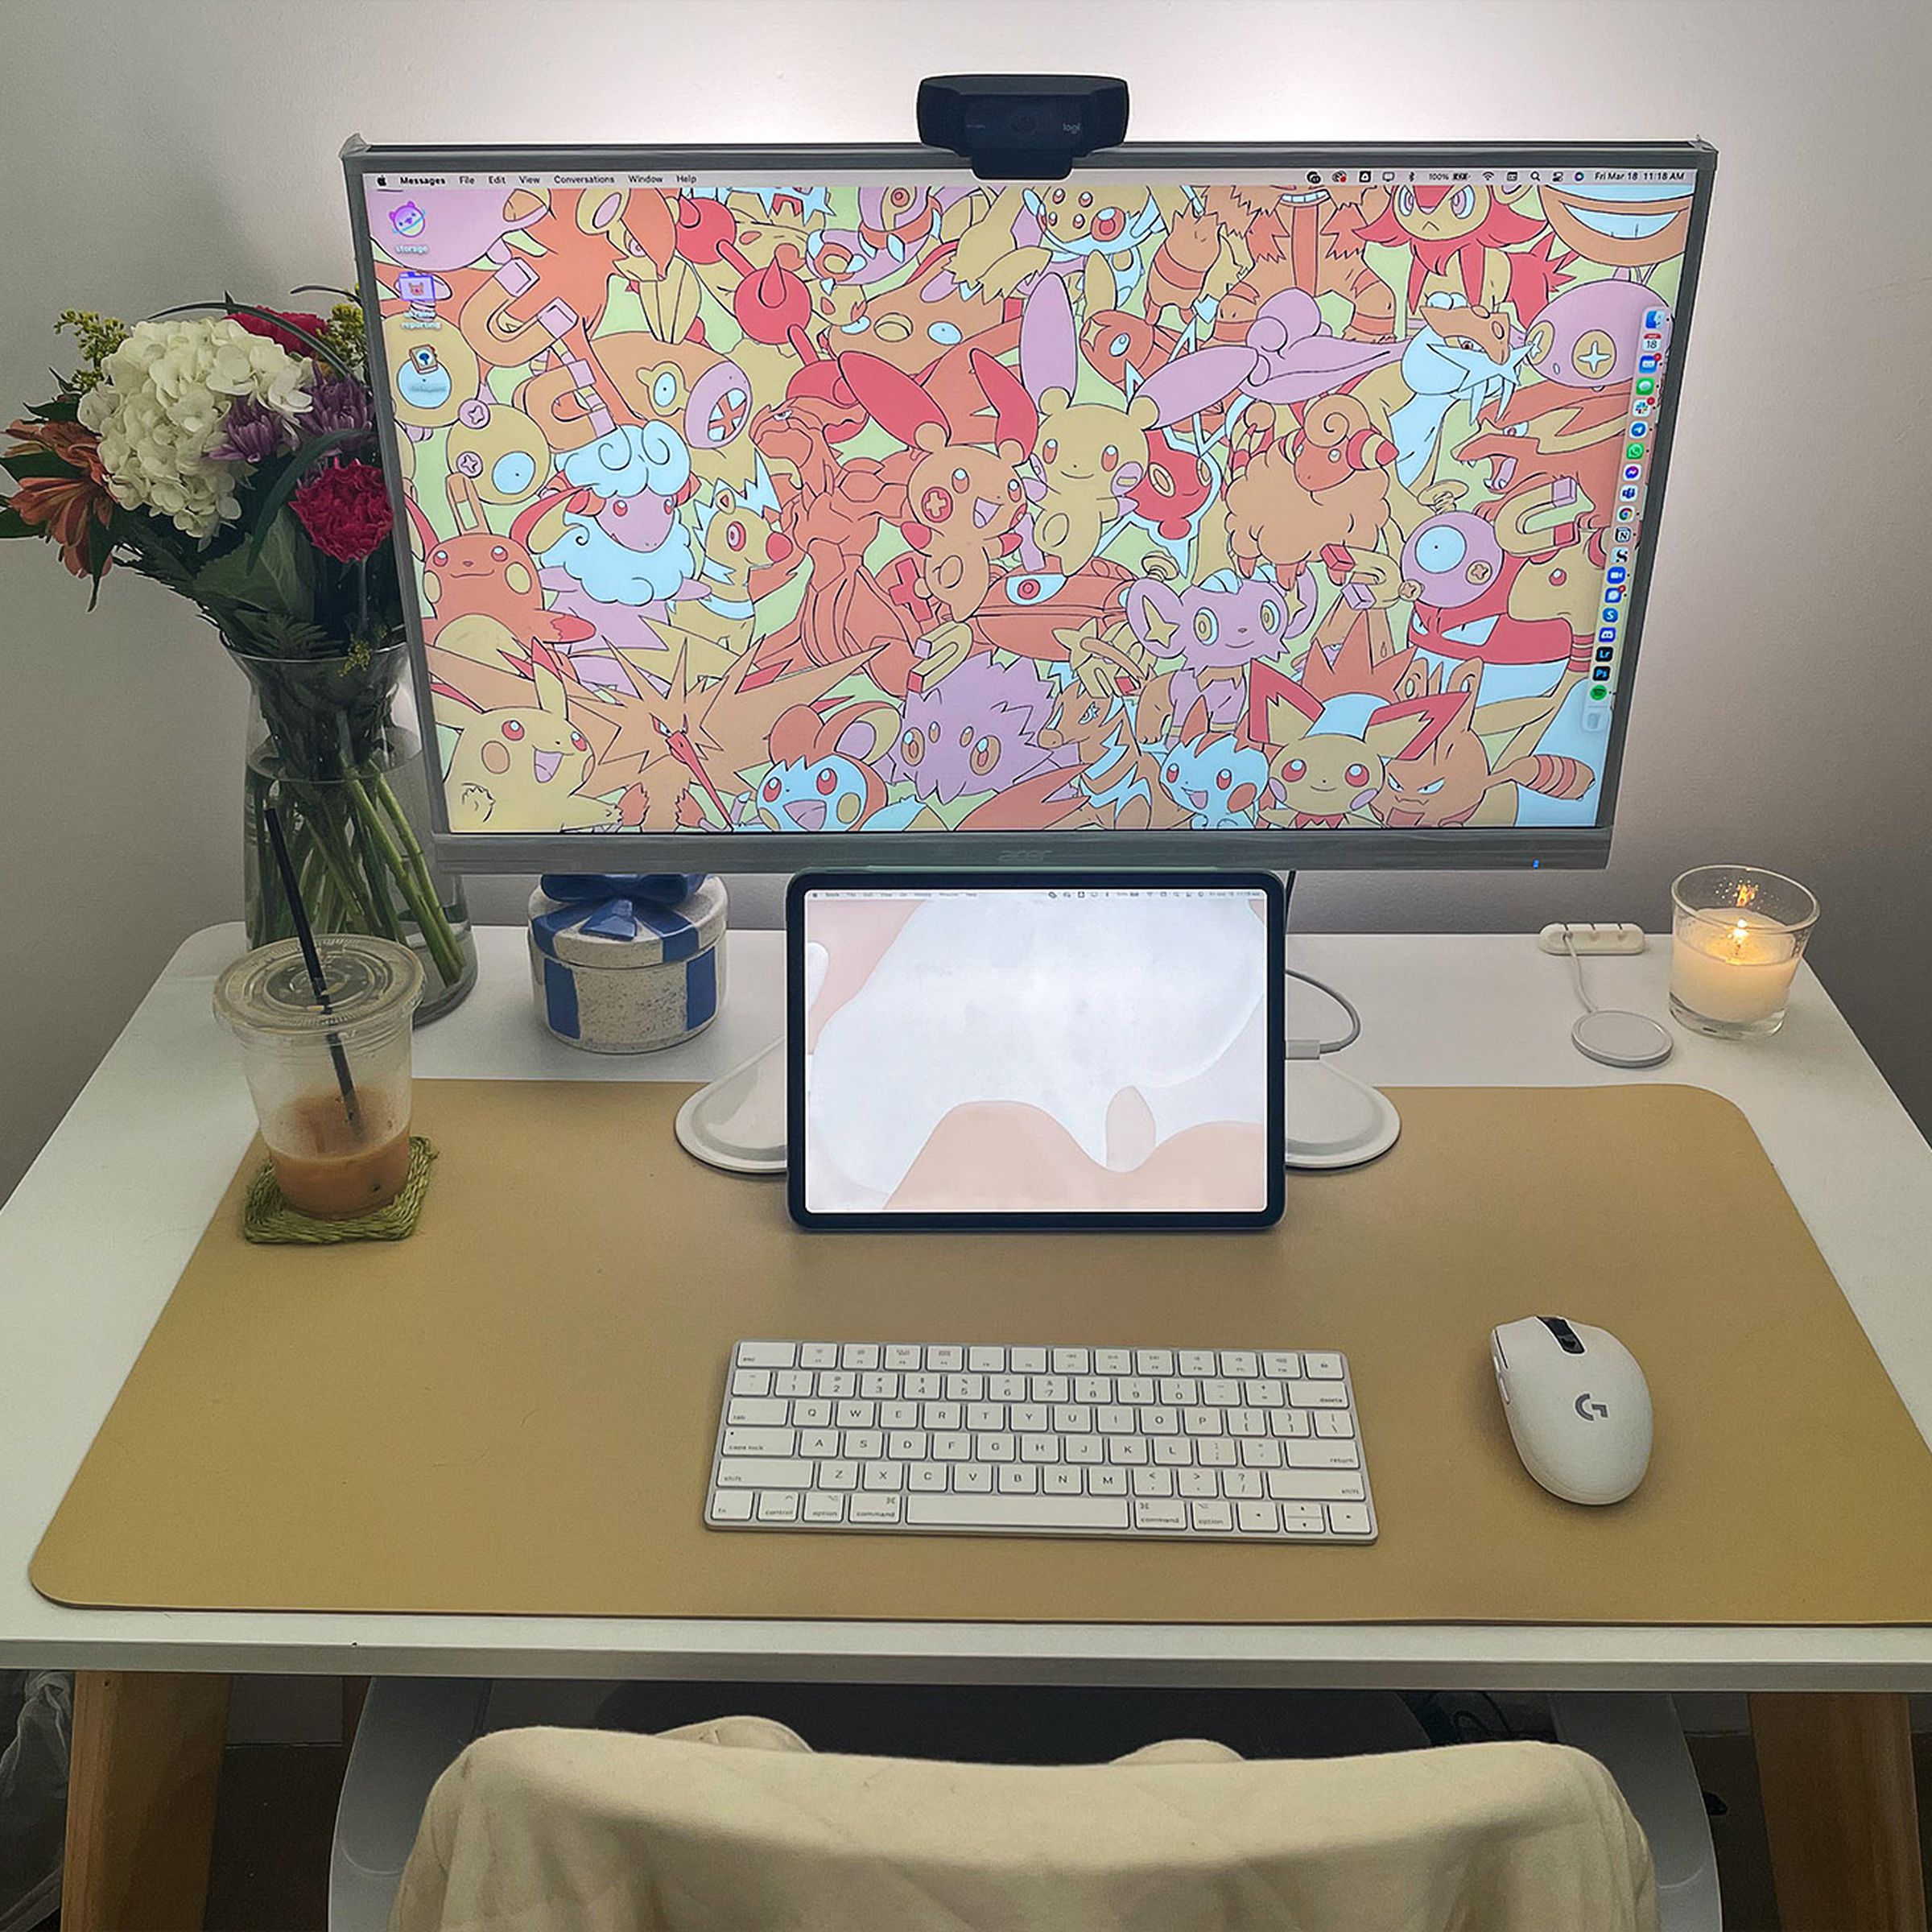 Even a cheap desk can look nice when well-decorated.